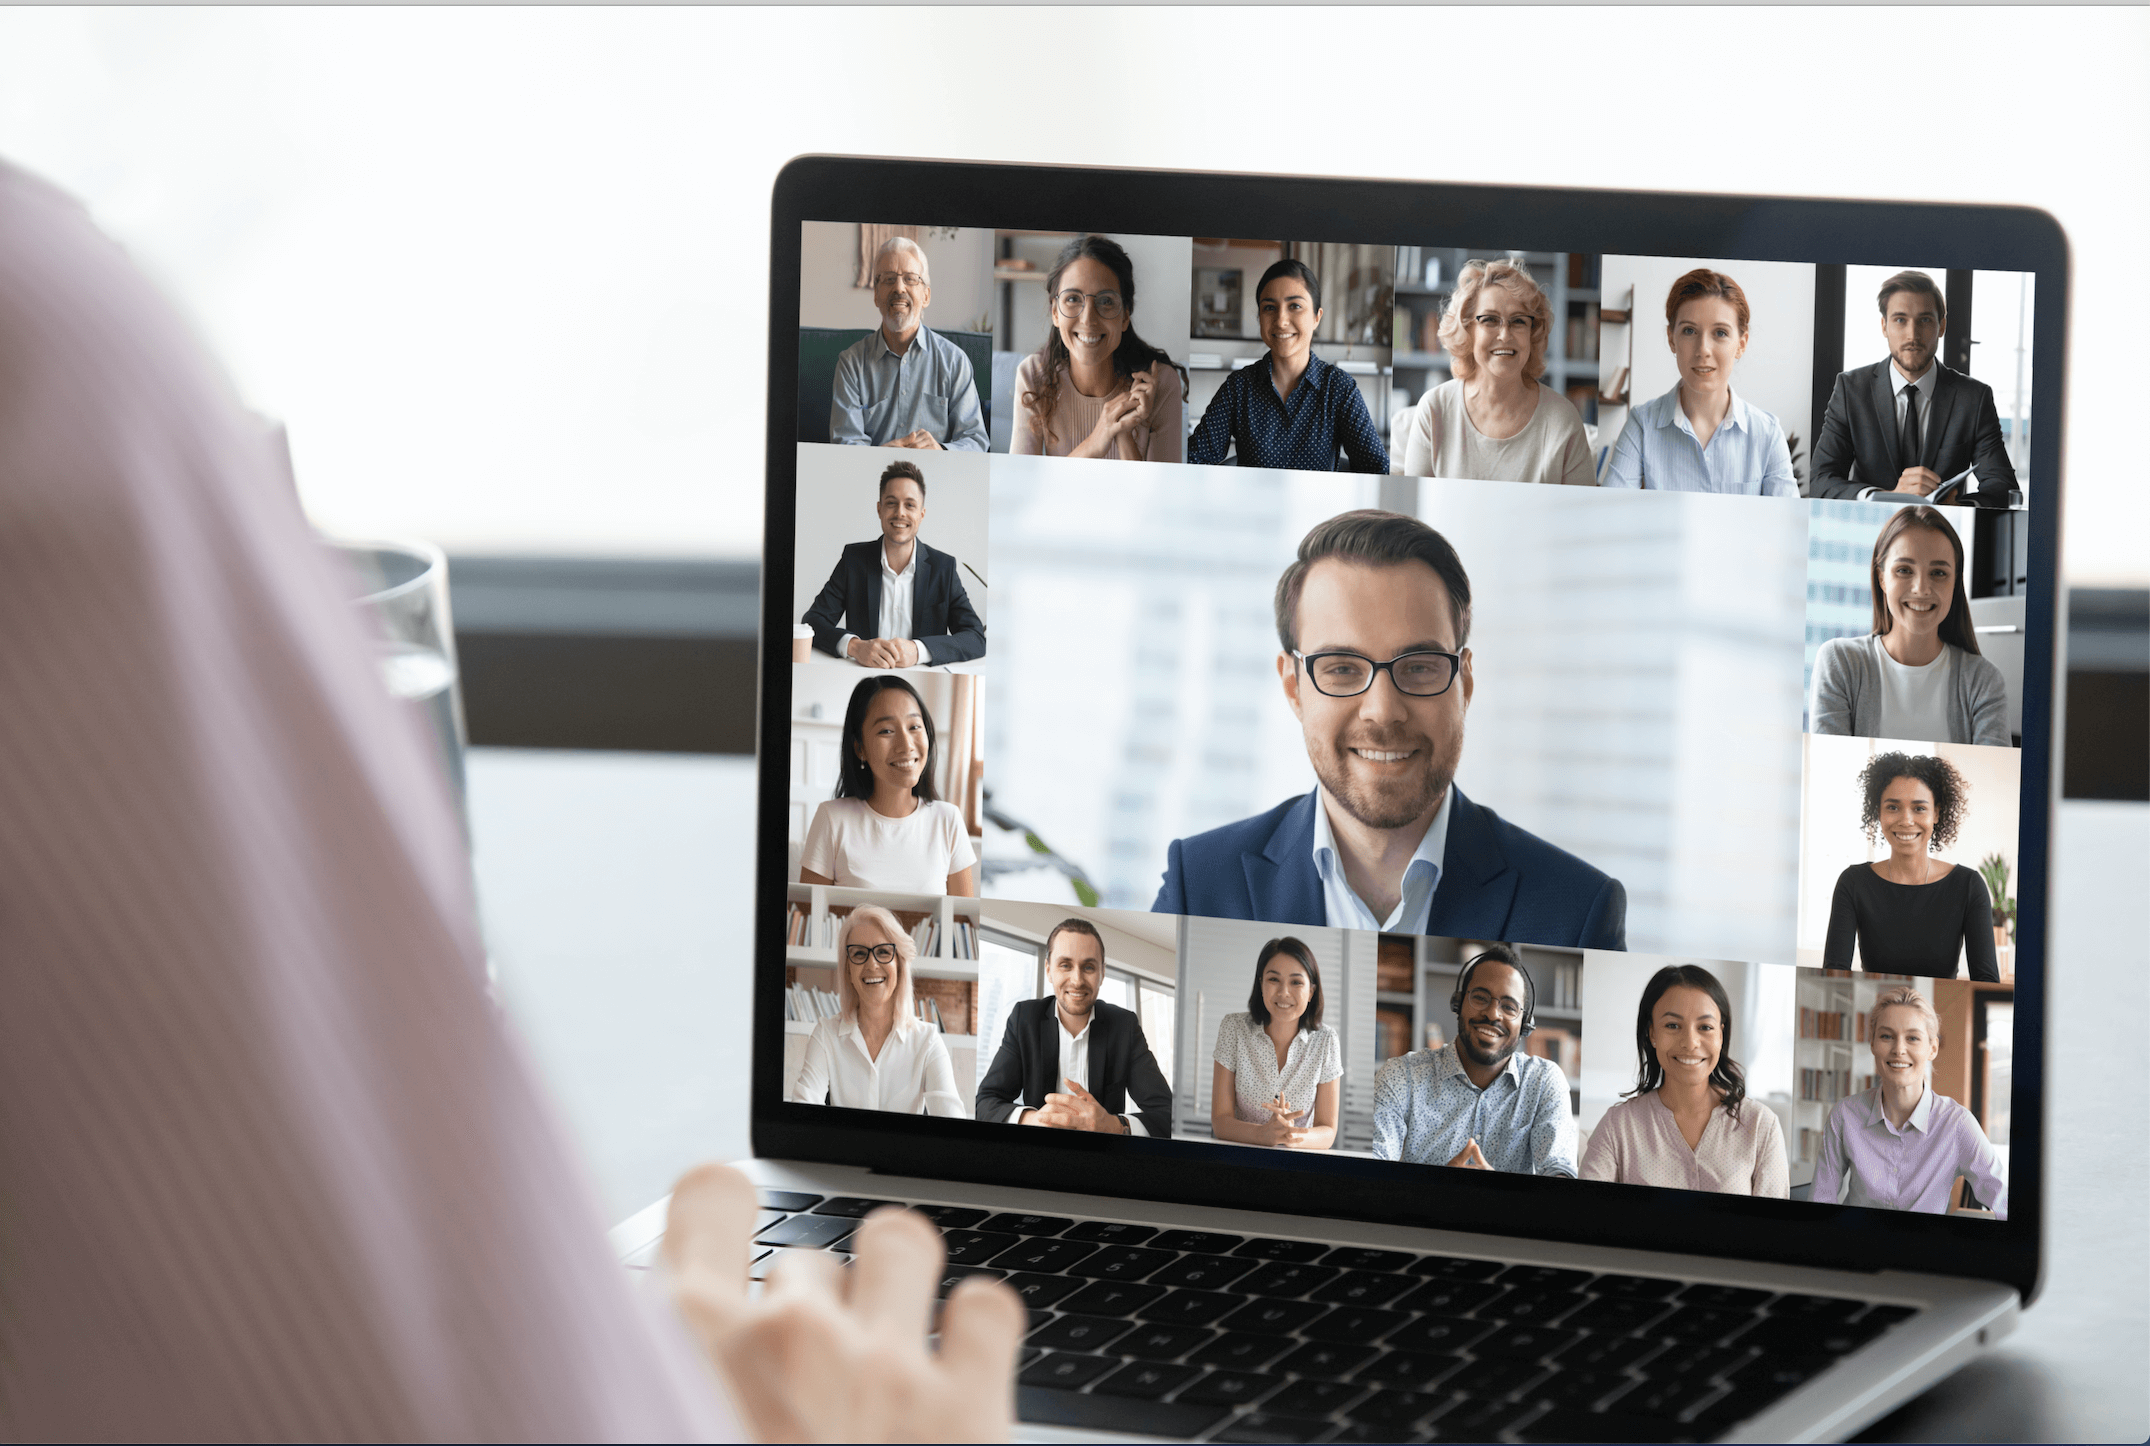 Best Practices for Leading Virtual Meetings